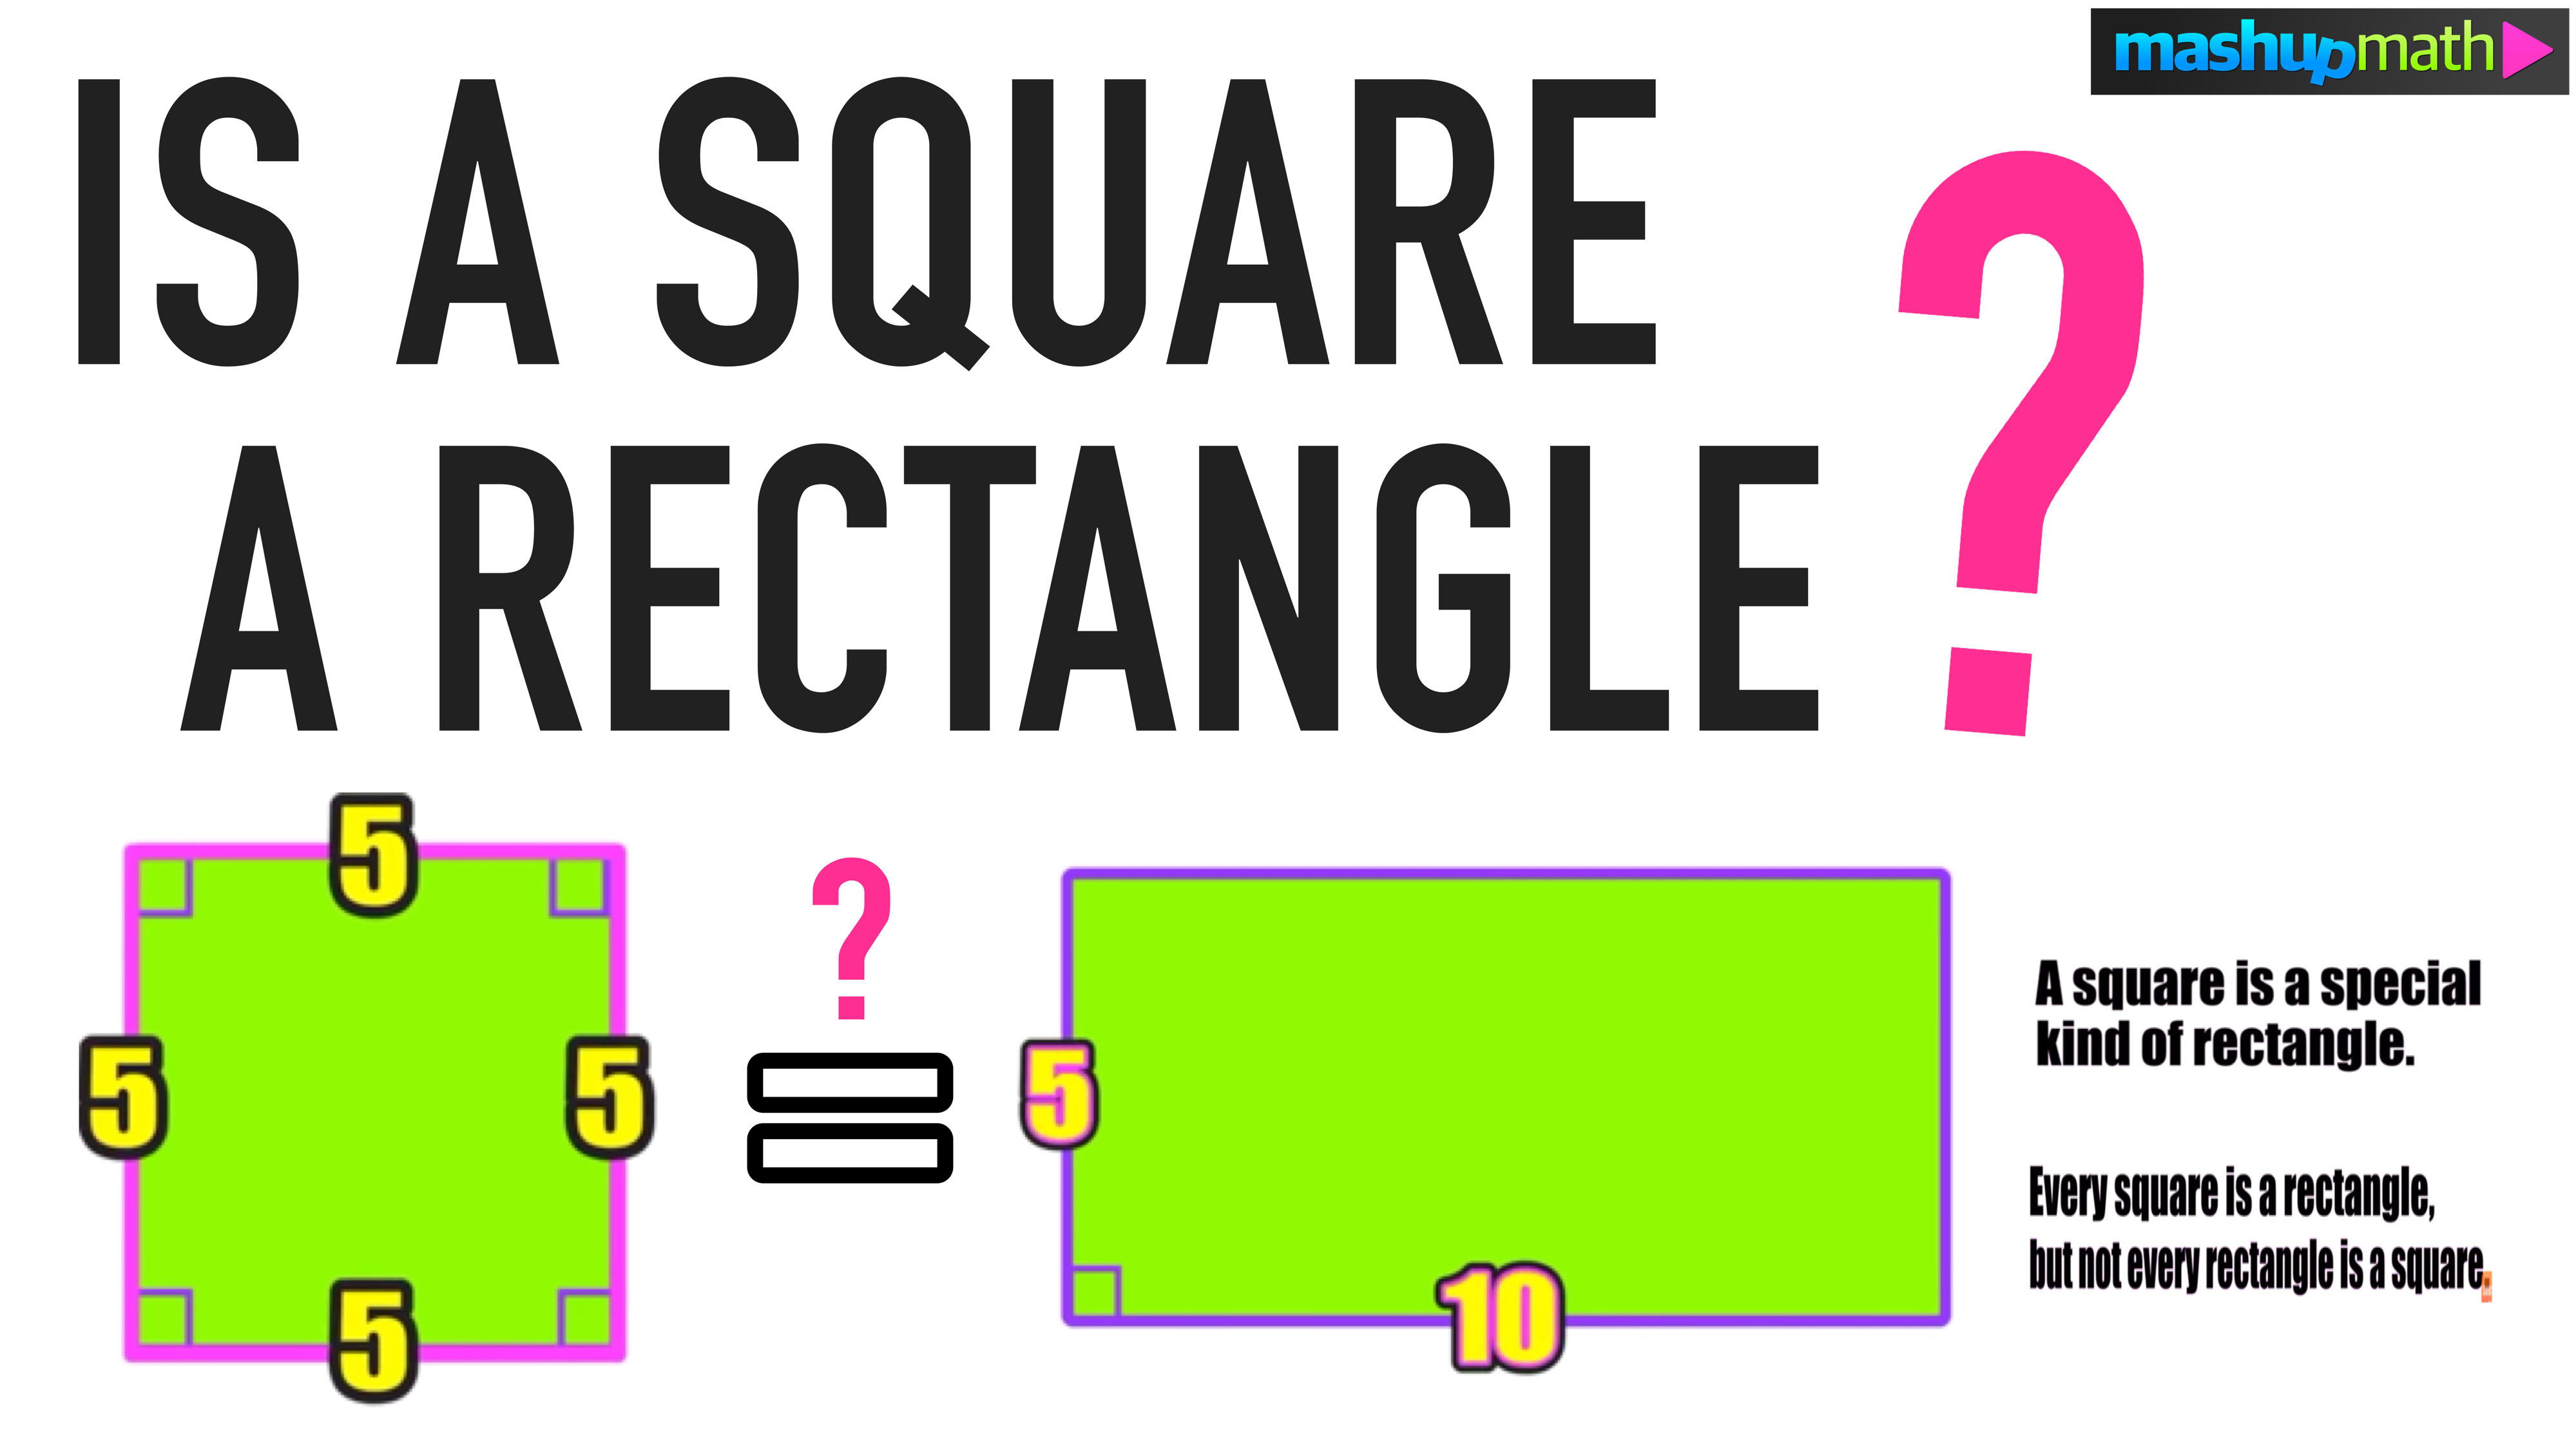 Is a Square a Rectangle? Yes or No? — Mashup Math